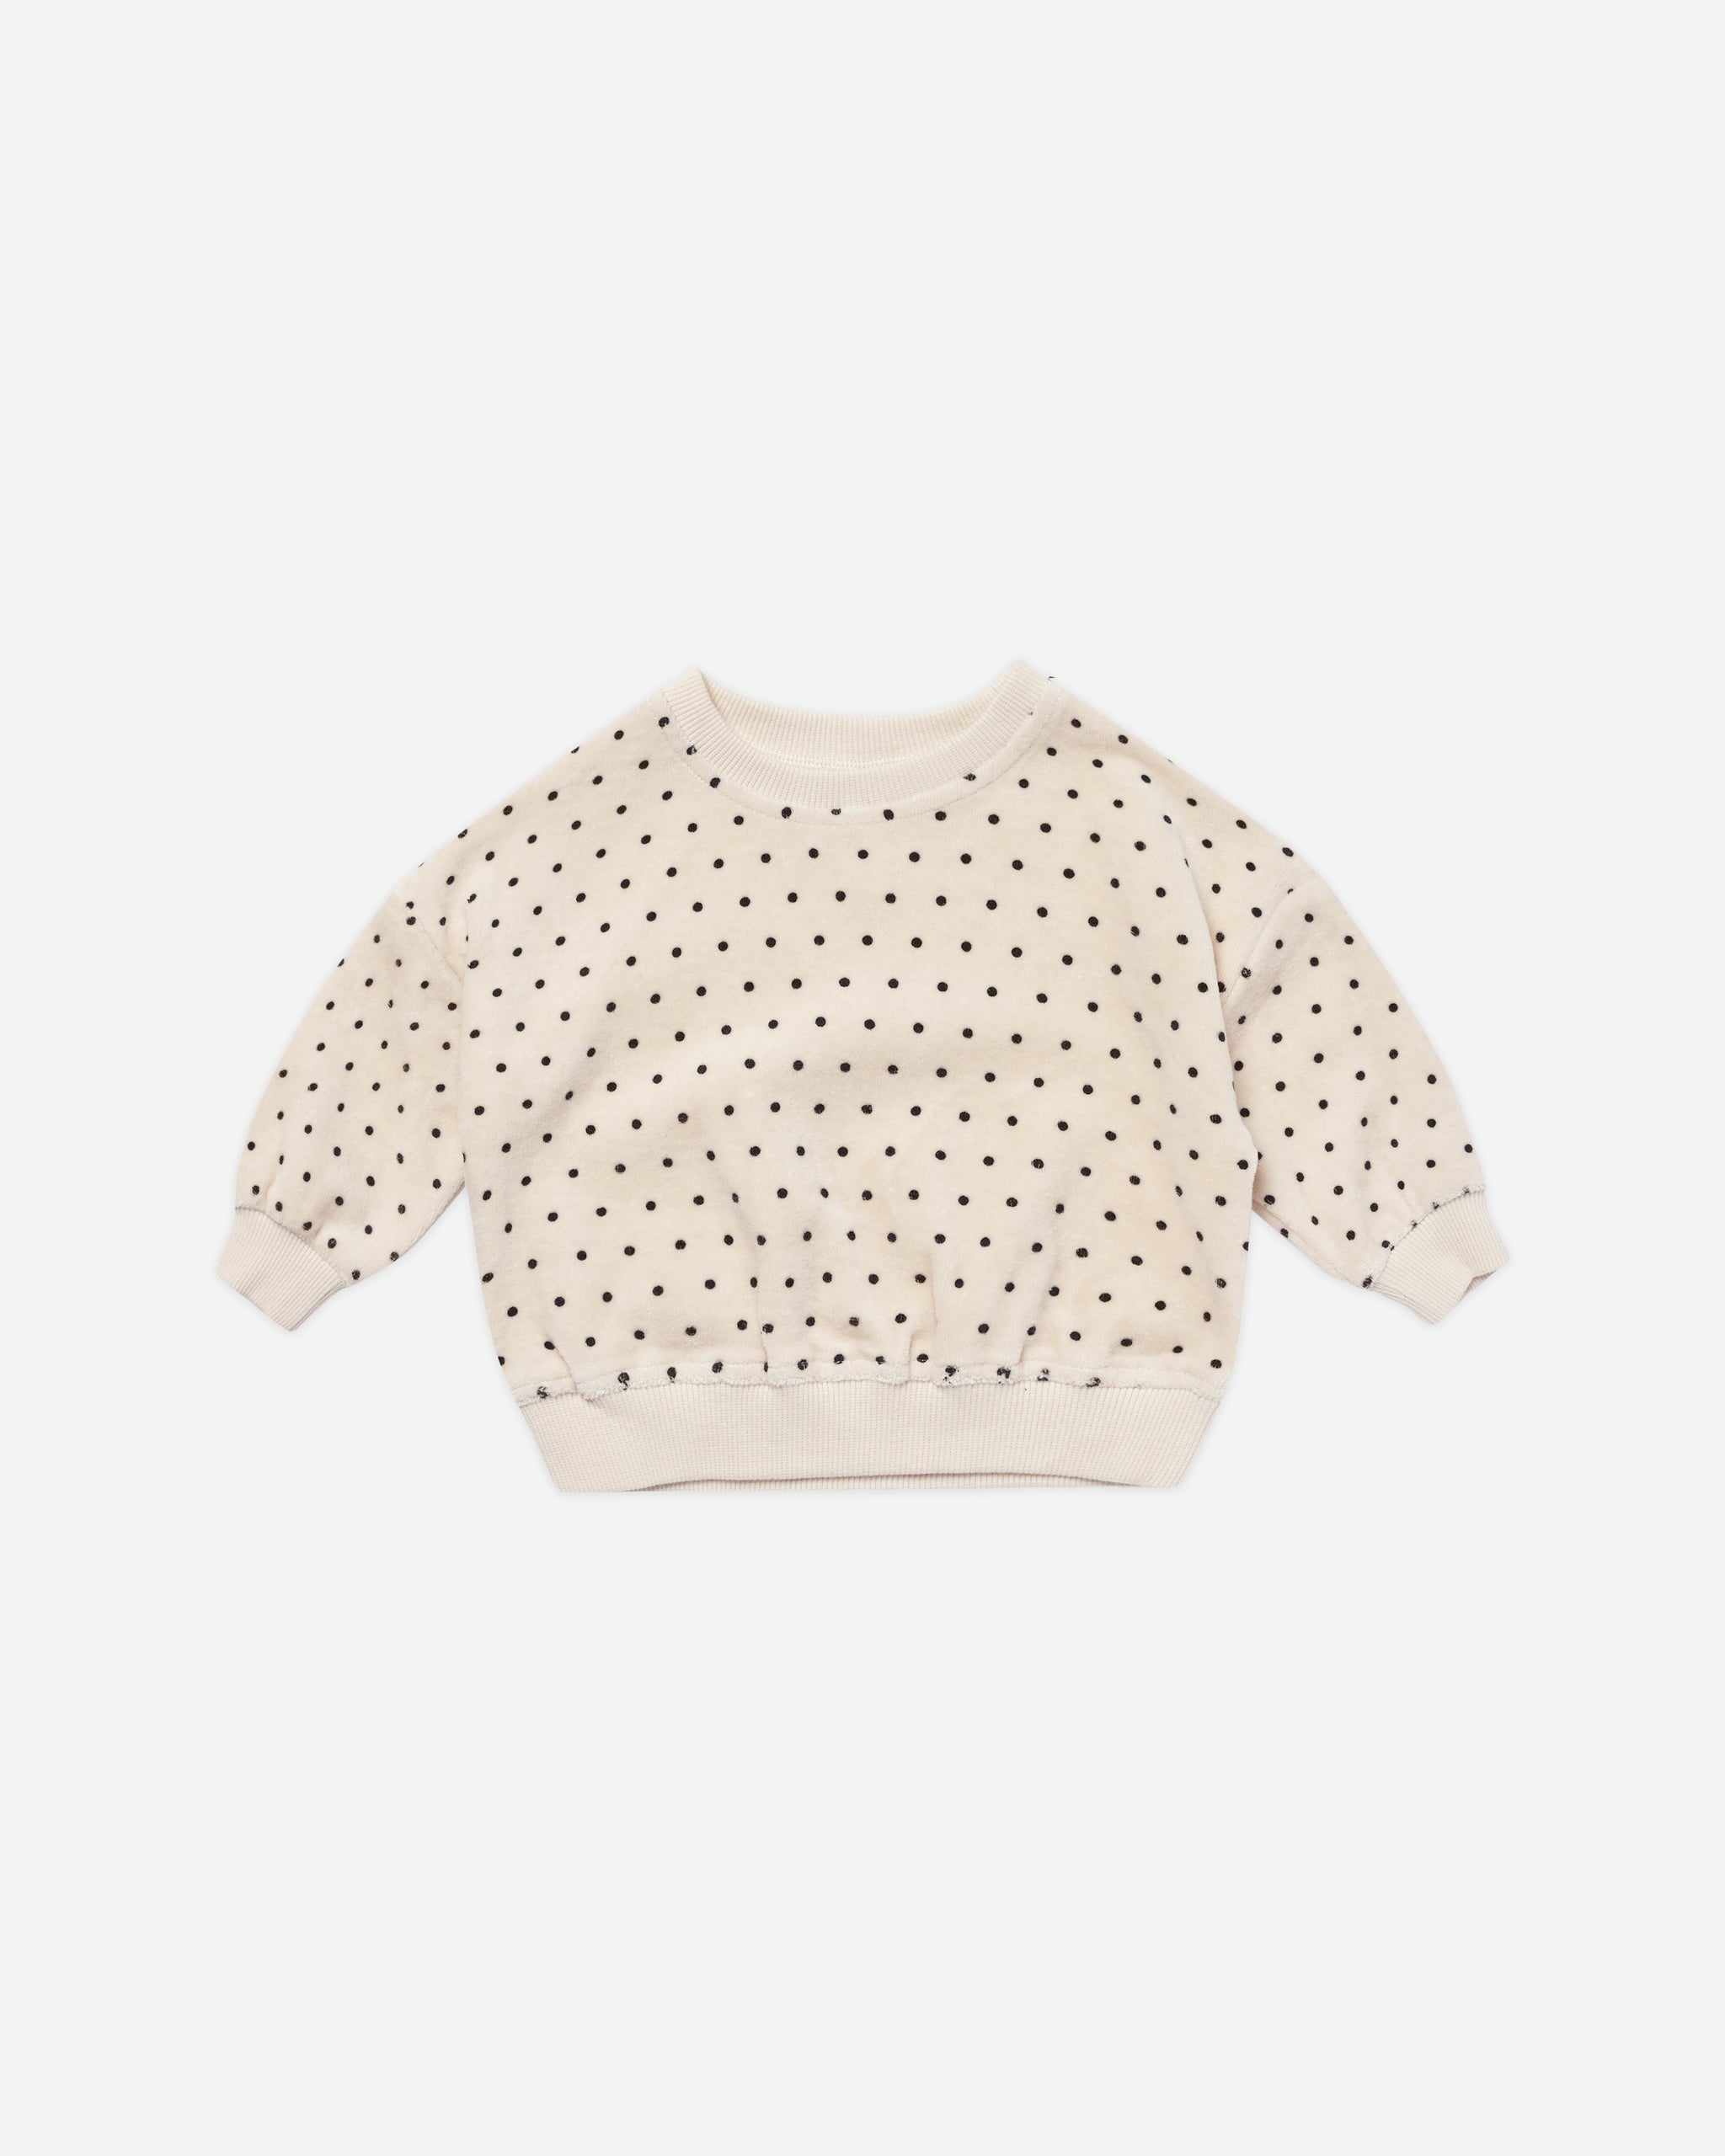 Velour Relaxed Sweatshirt || Polka Dot - Rylee + Cru | Kids Clothes | Trendy Baby Clothes | Modern Infant Outfits |